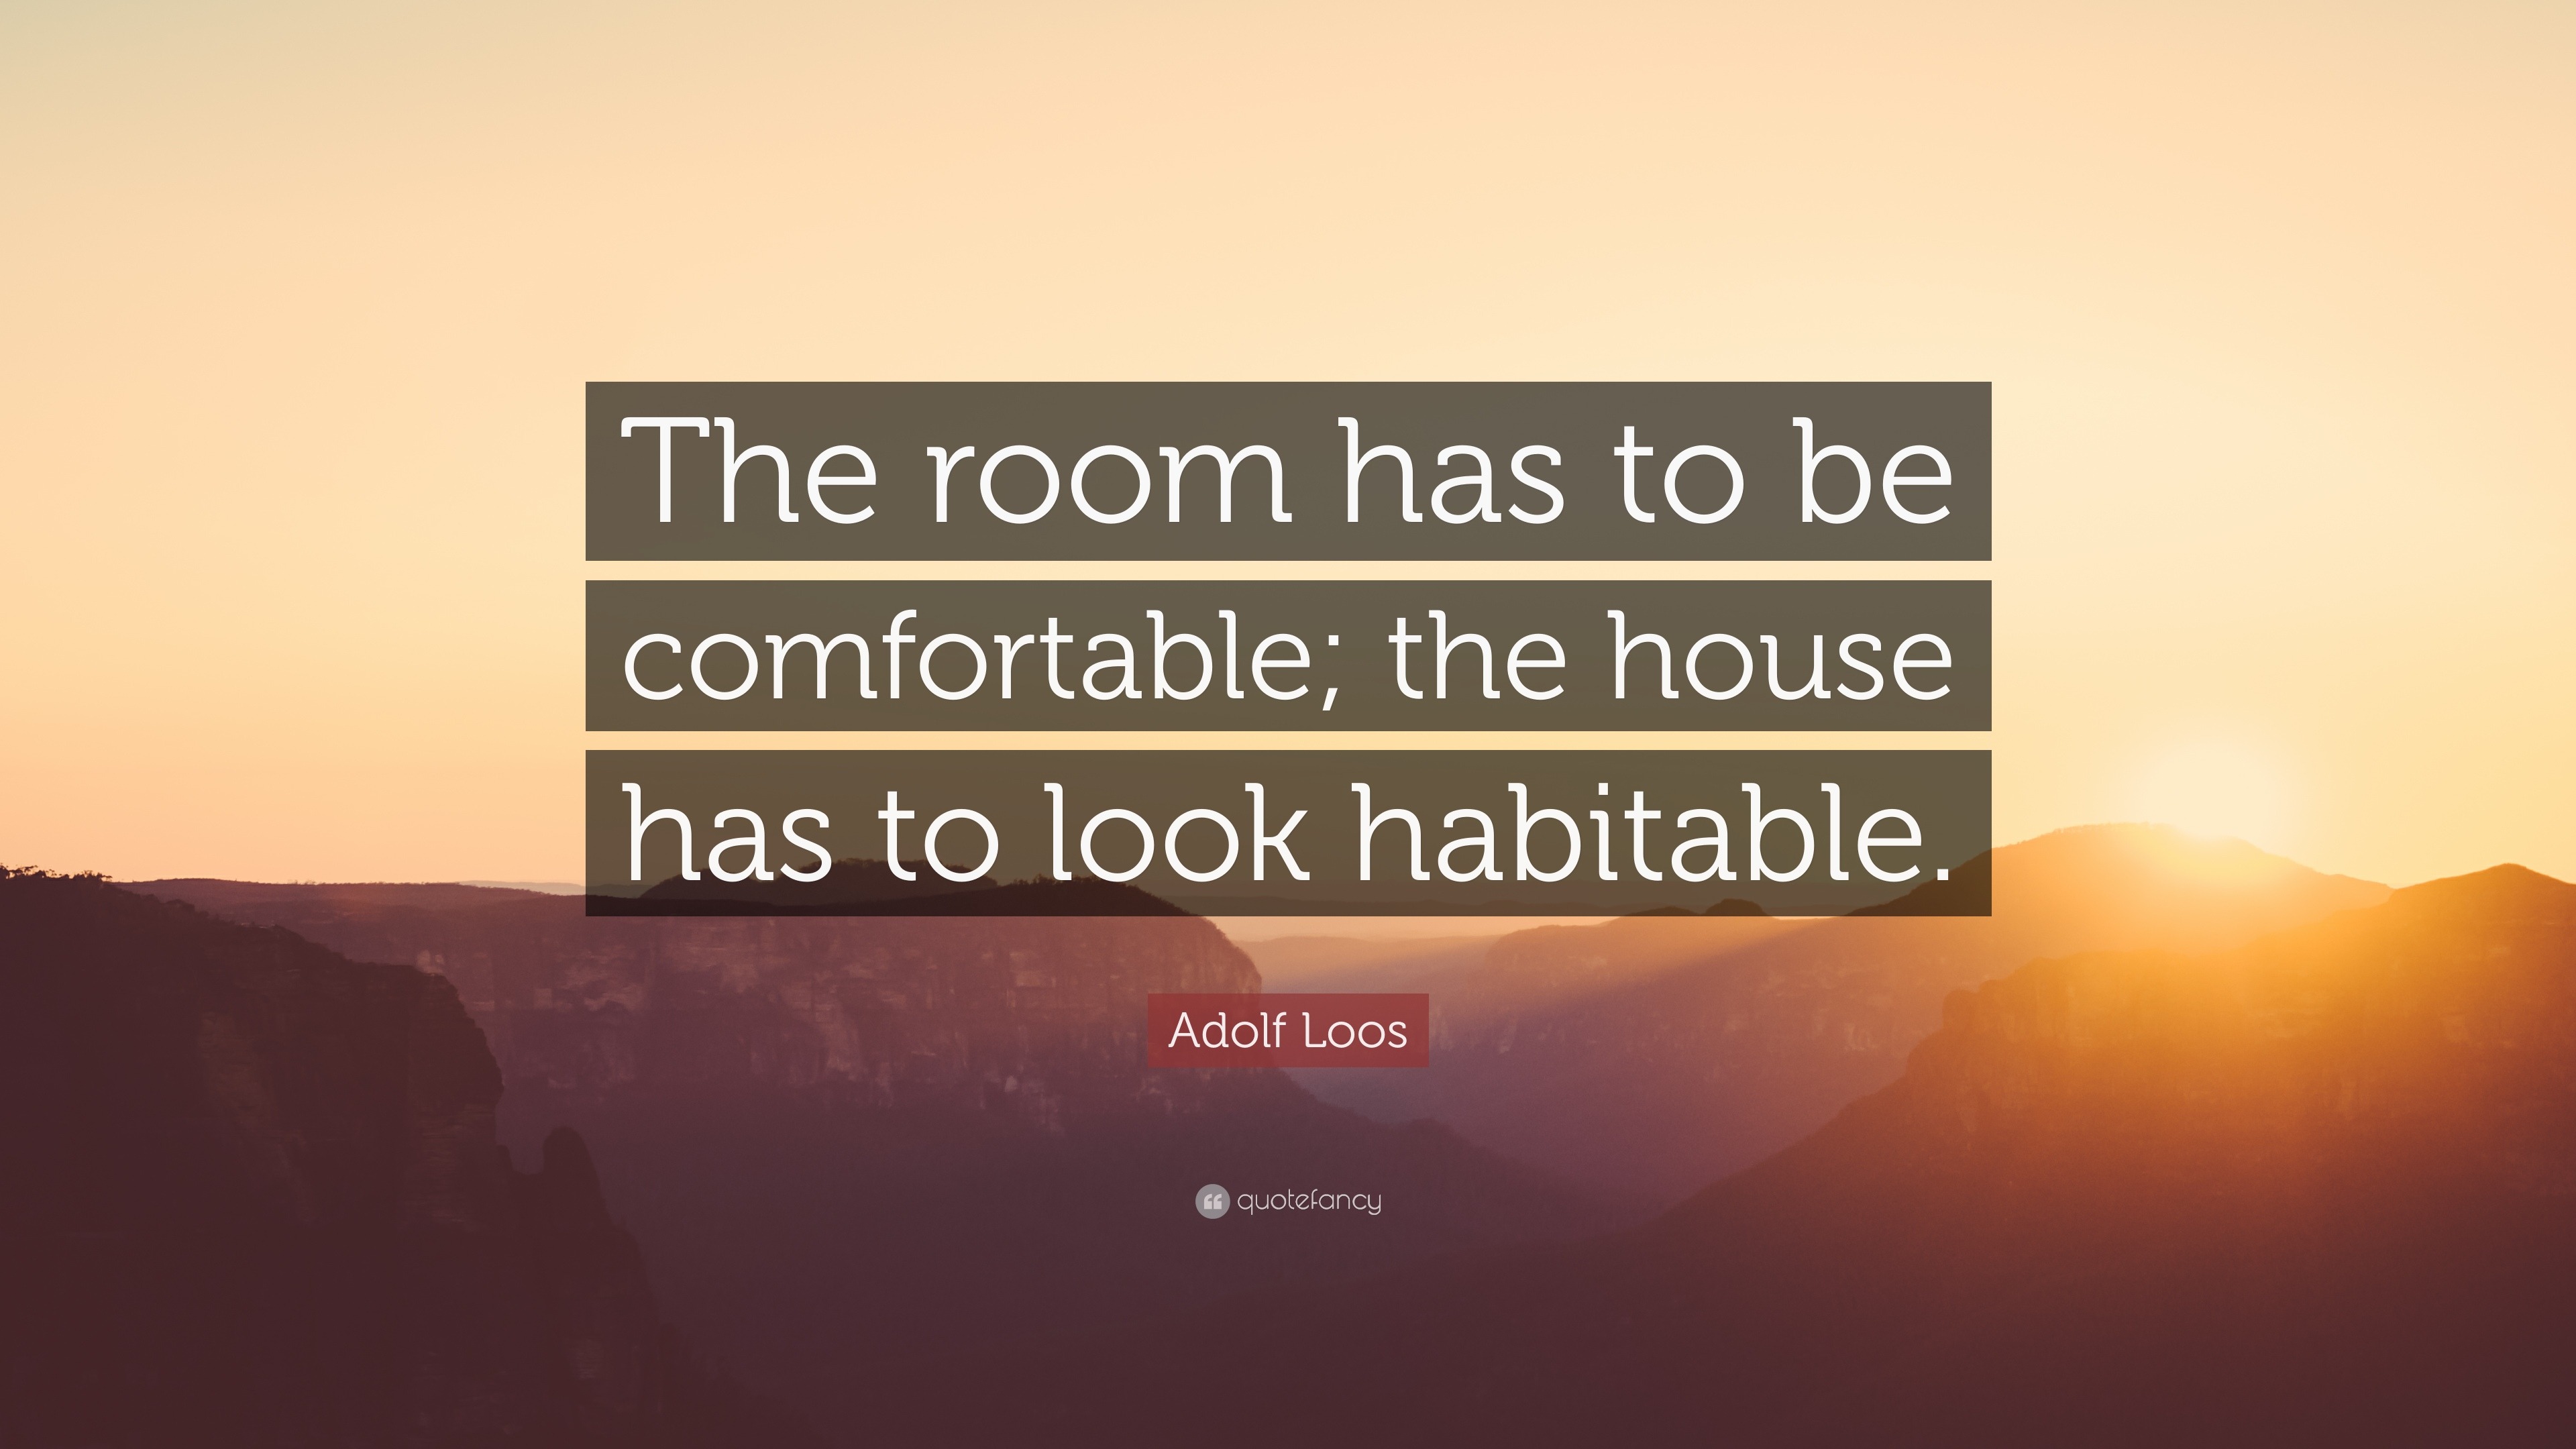 Adolf Loos Quote: “The room has to be comfortable; the house has to ...